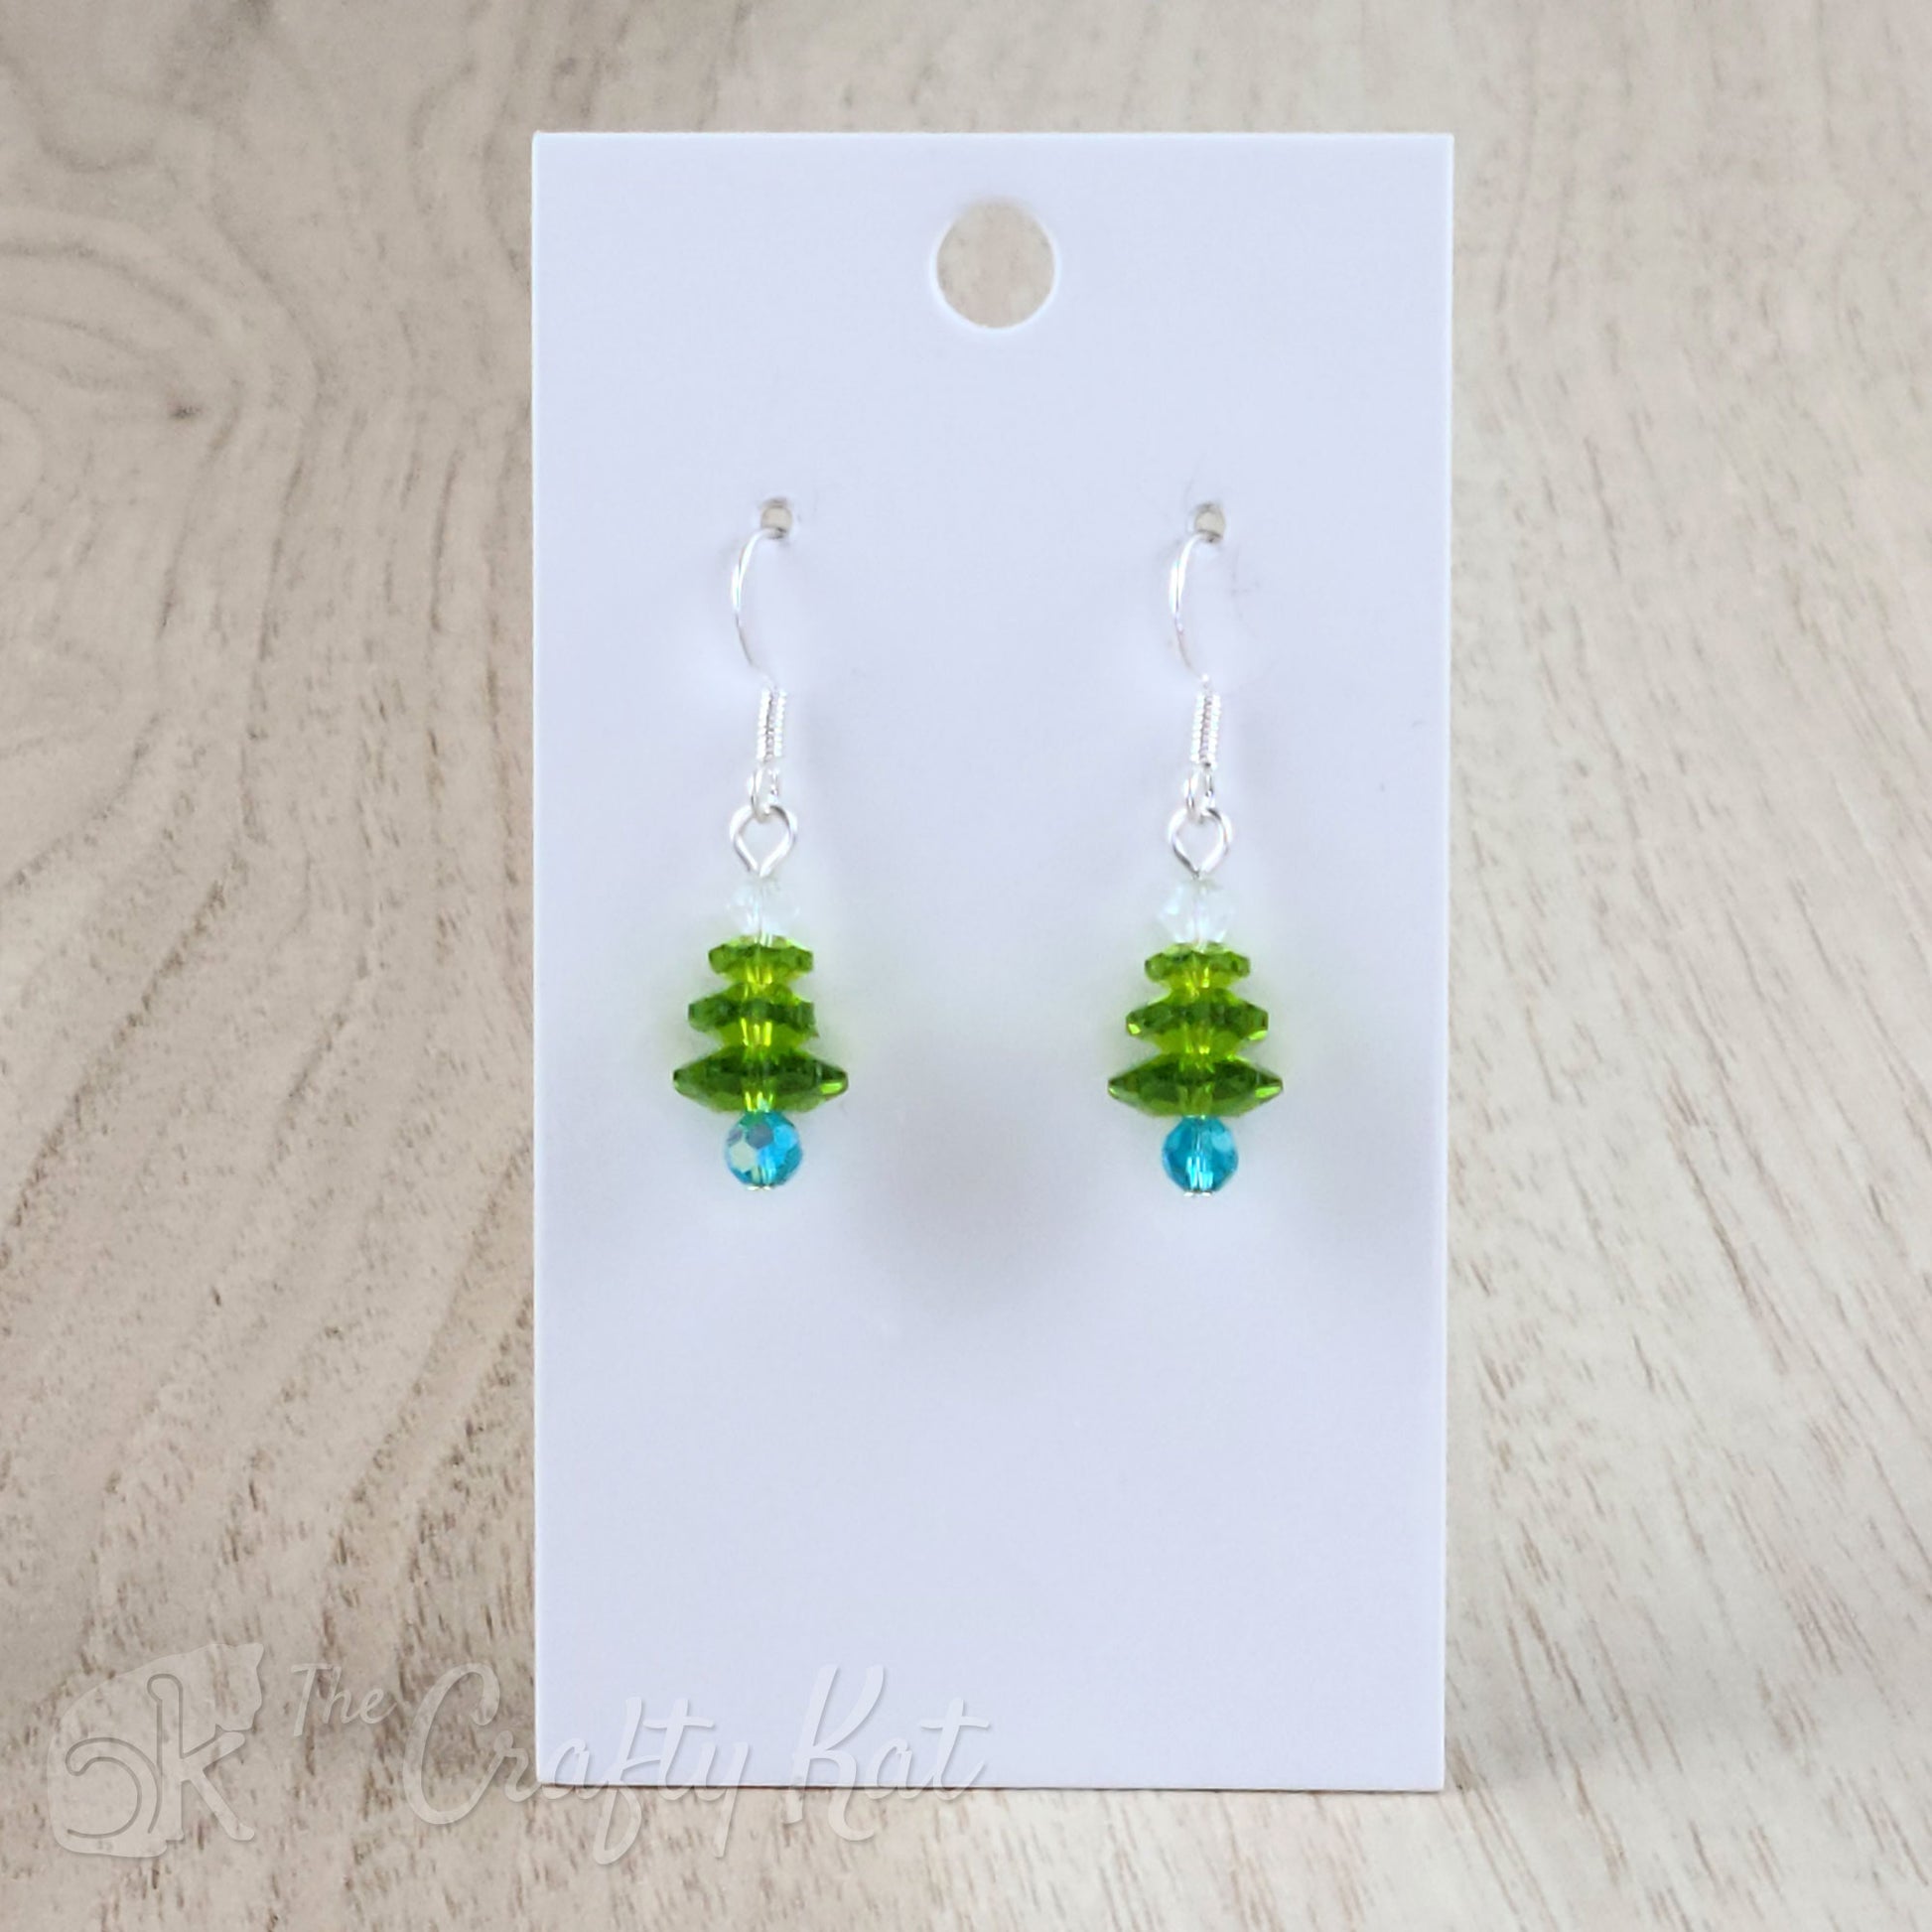 A pair of earring drops made of faceted crystal beads, each drop forming the shape of a holiday tree. This variation features an aqua/sky blue base, peridot branches, and a white topper on silver-plated base metal.